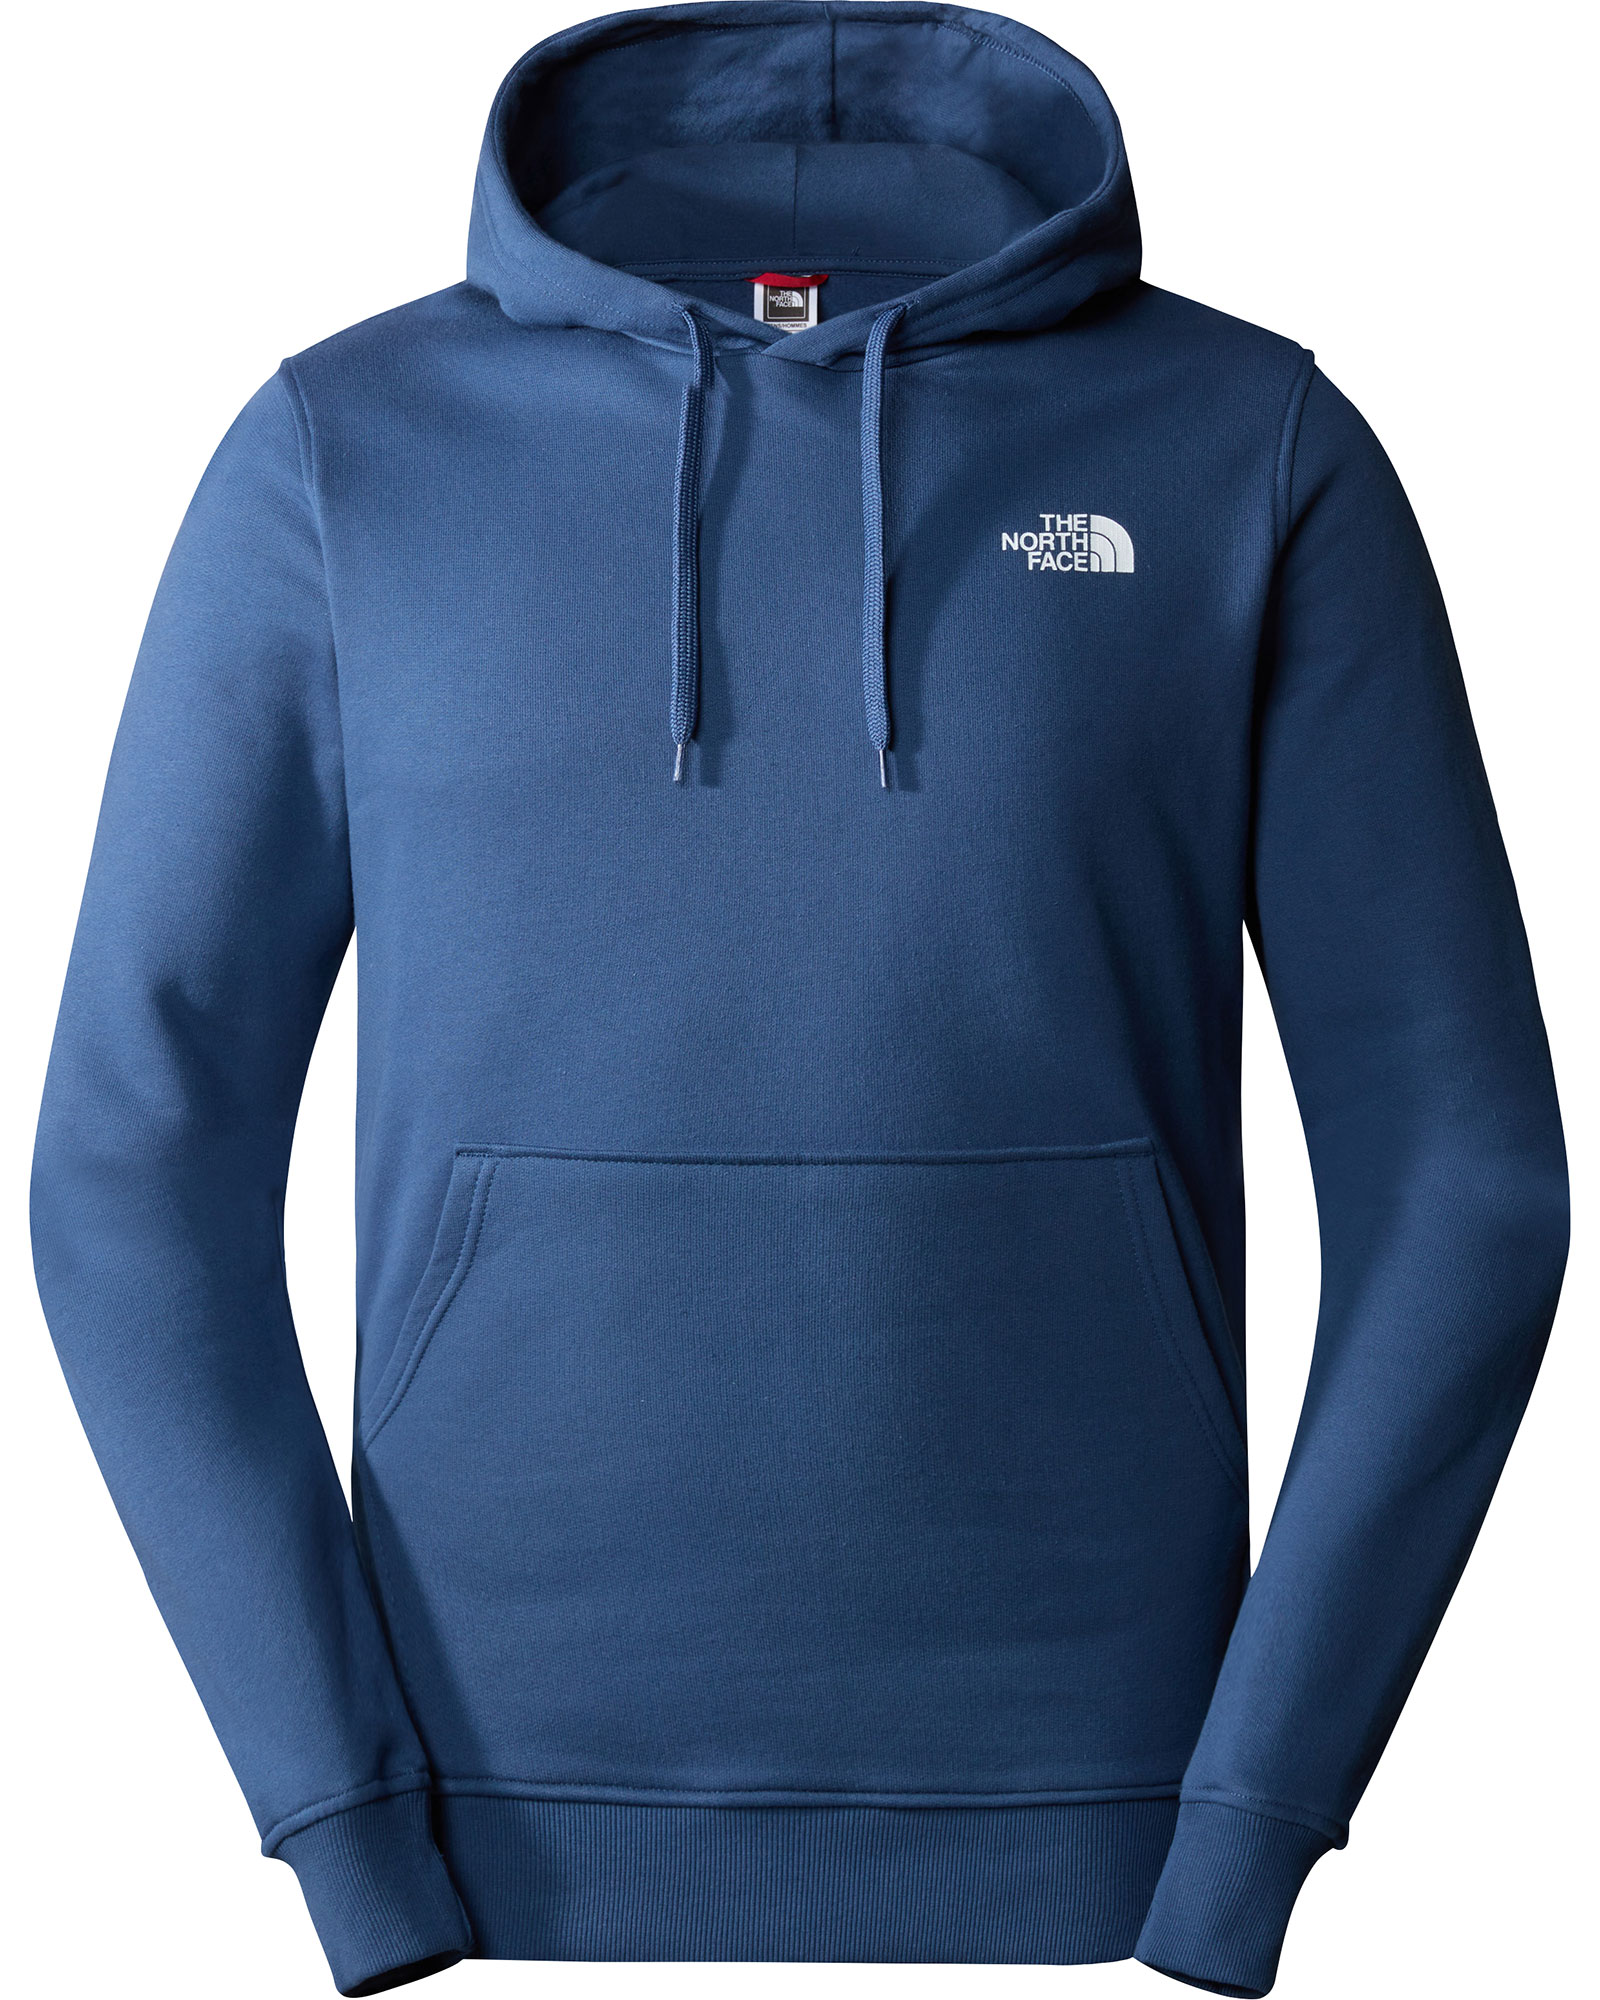 The North Face Men’s Simple Dome Hoodie - Shady Blue S